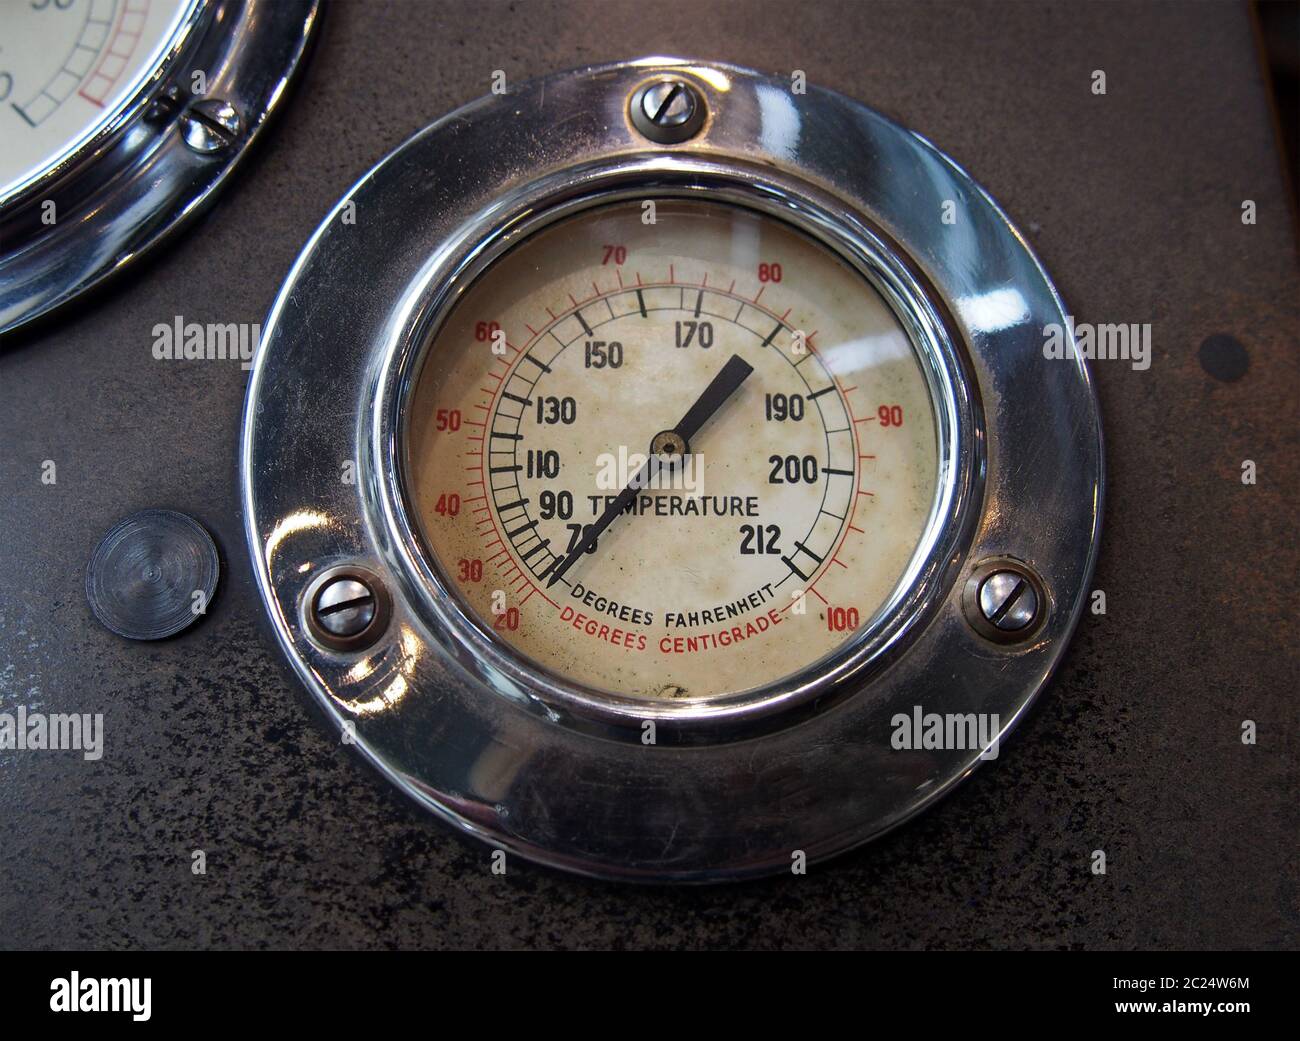 https://c8.alamy.com/comp/2C24W6M/close-up-of-an-old-round-metal-temperature-gauge-with-the-meter-reading-in-fahrenheit-and-celsius-with-a-shiny-chrome-surround-m-2C24W6M.jpg